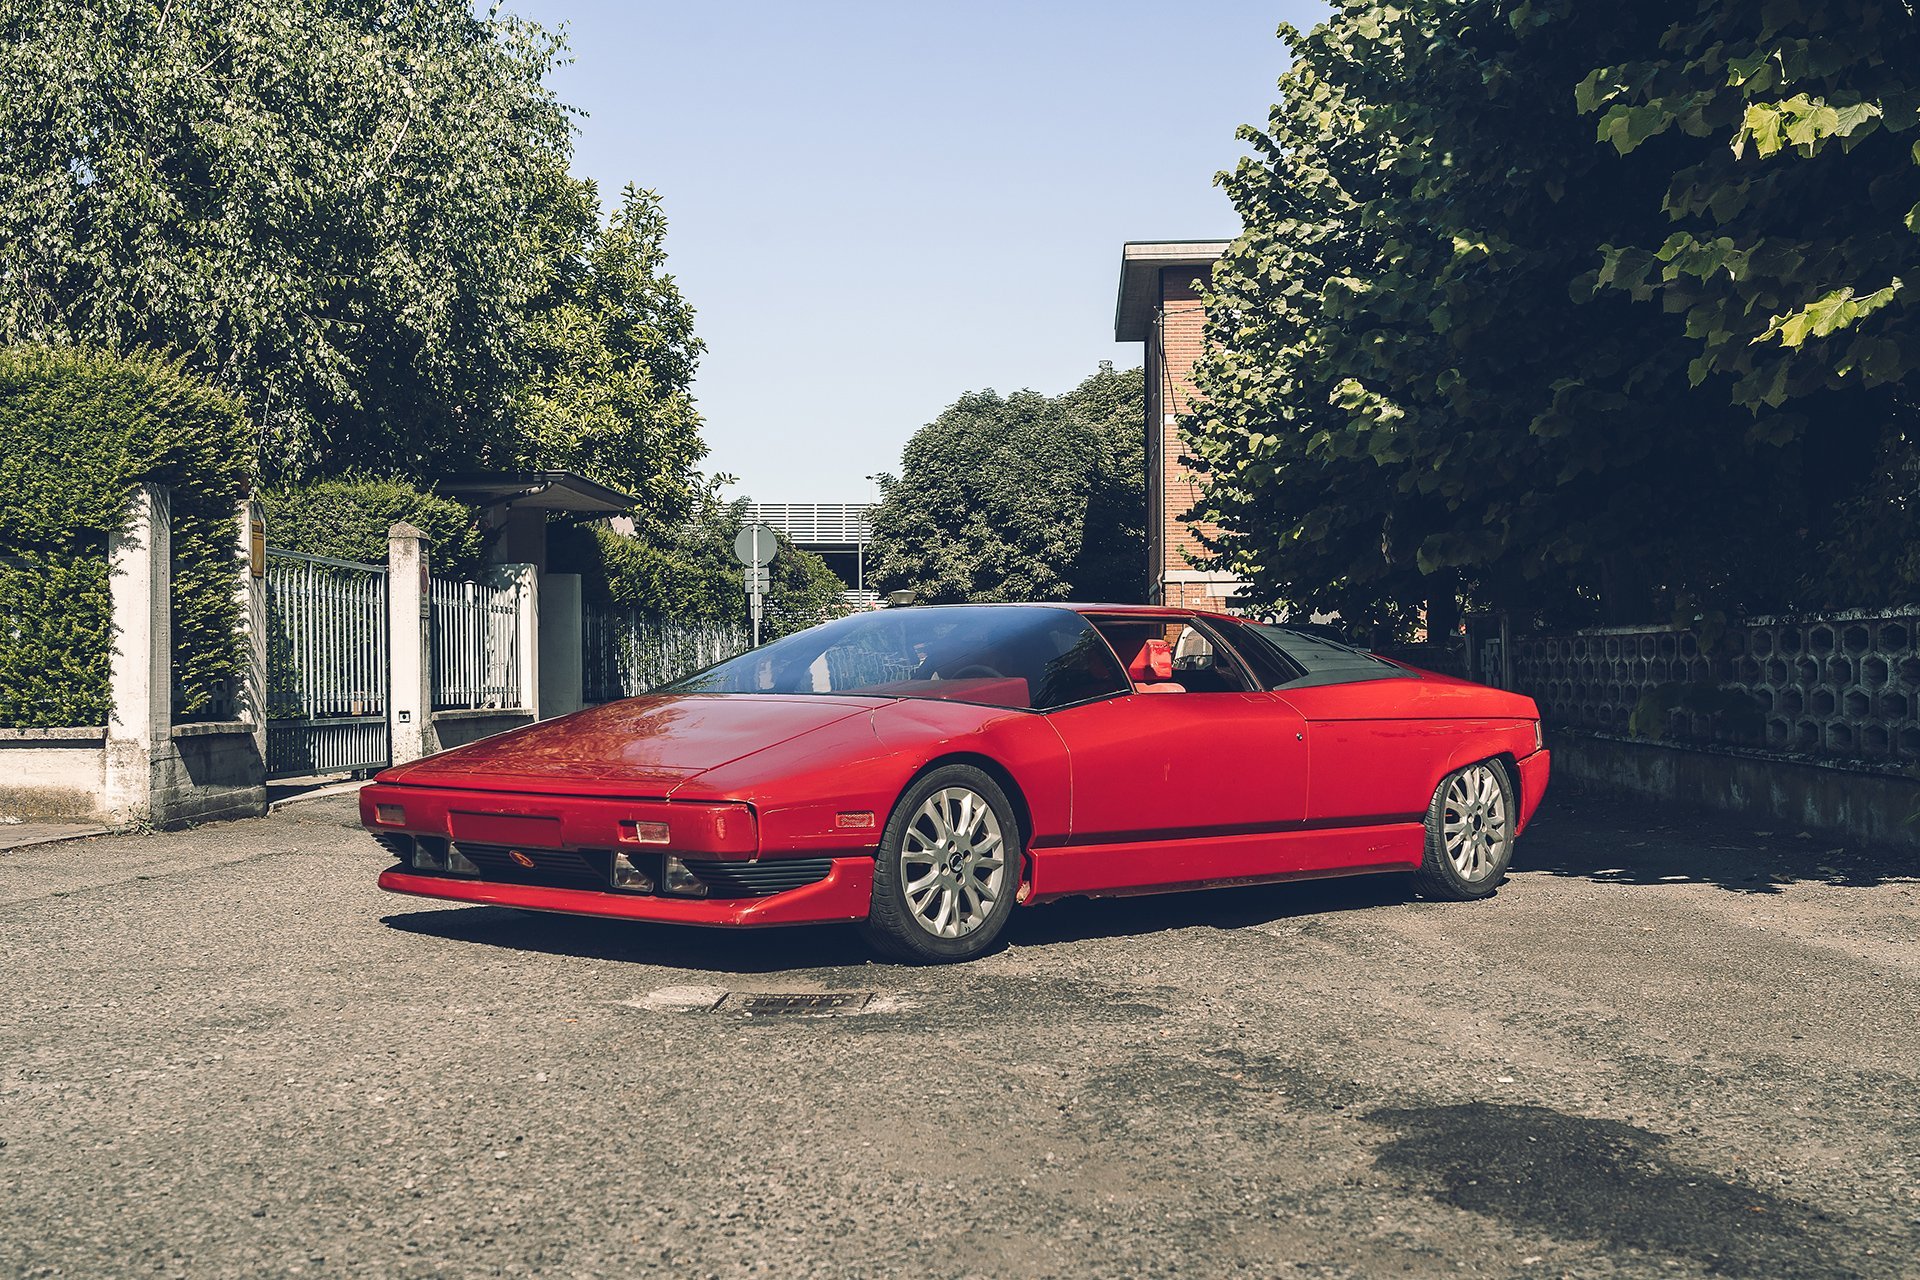 This Gandini-designed Cizeta prototype might be the missing link 